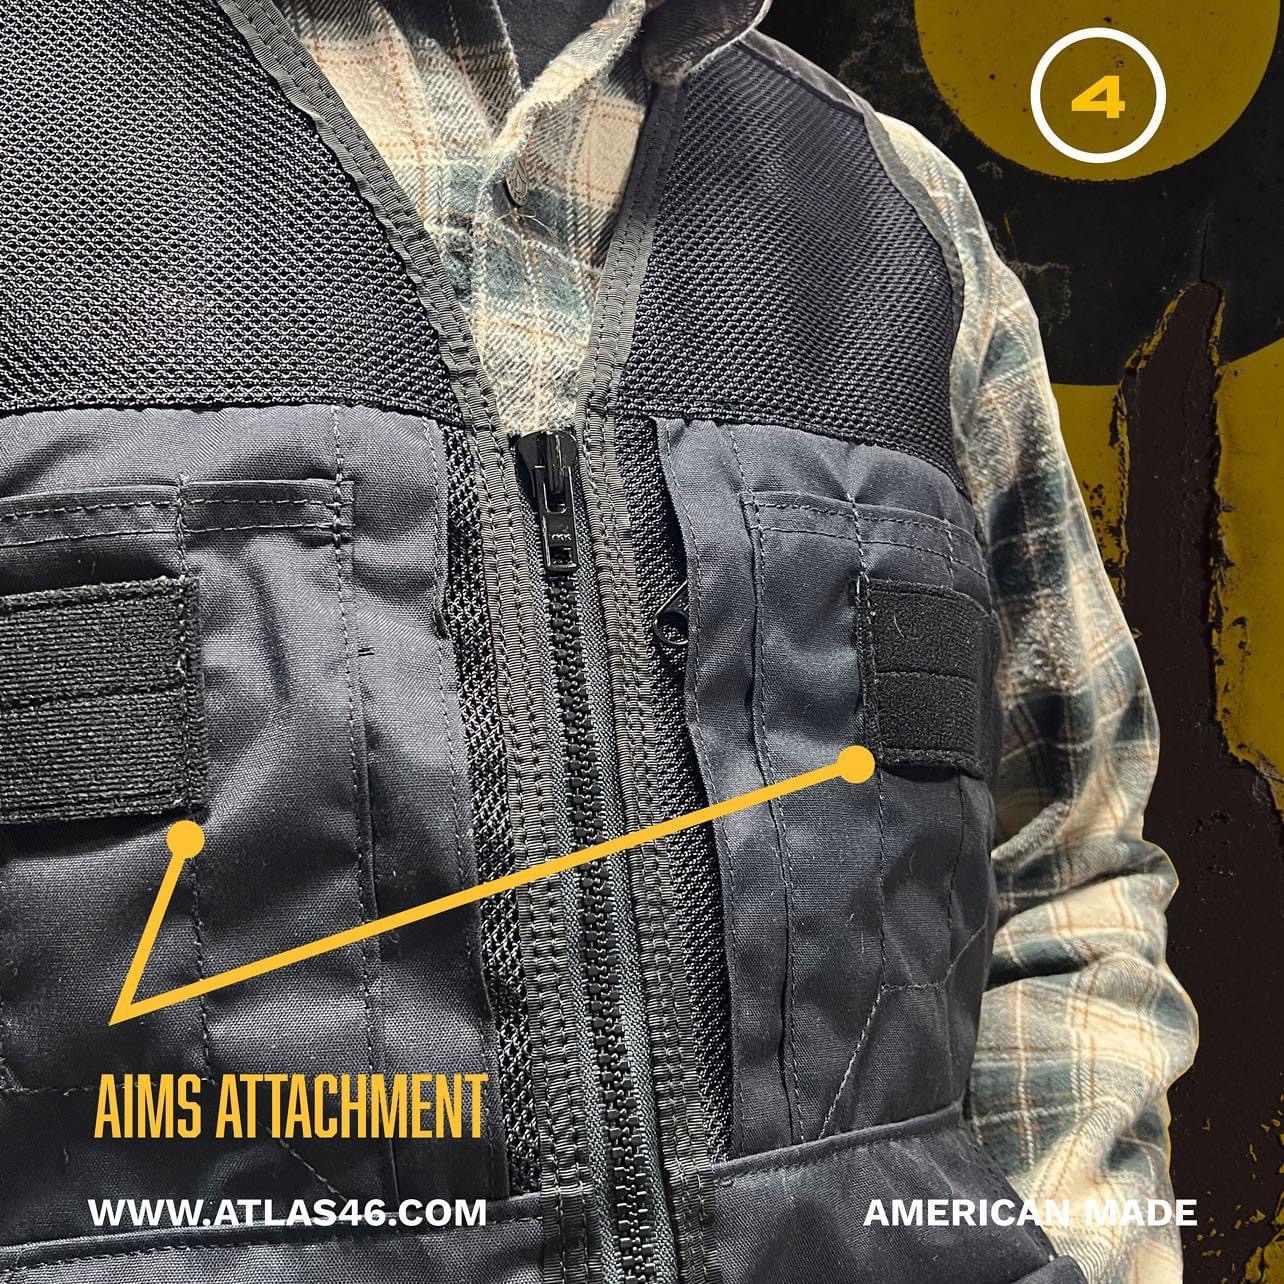 Atlas 46 – 1819 Work Vest - Soldier Systems Daily